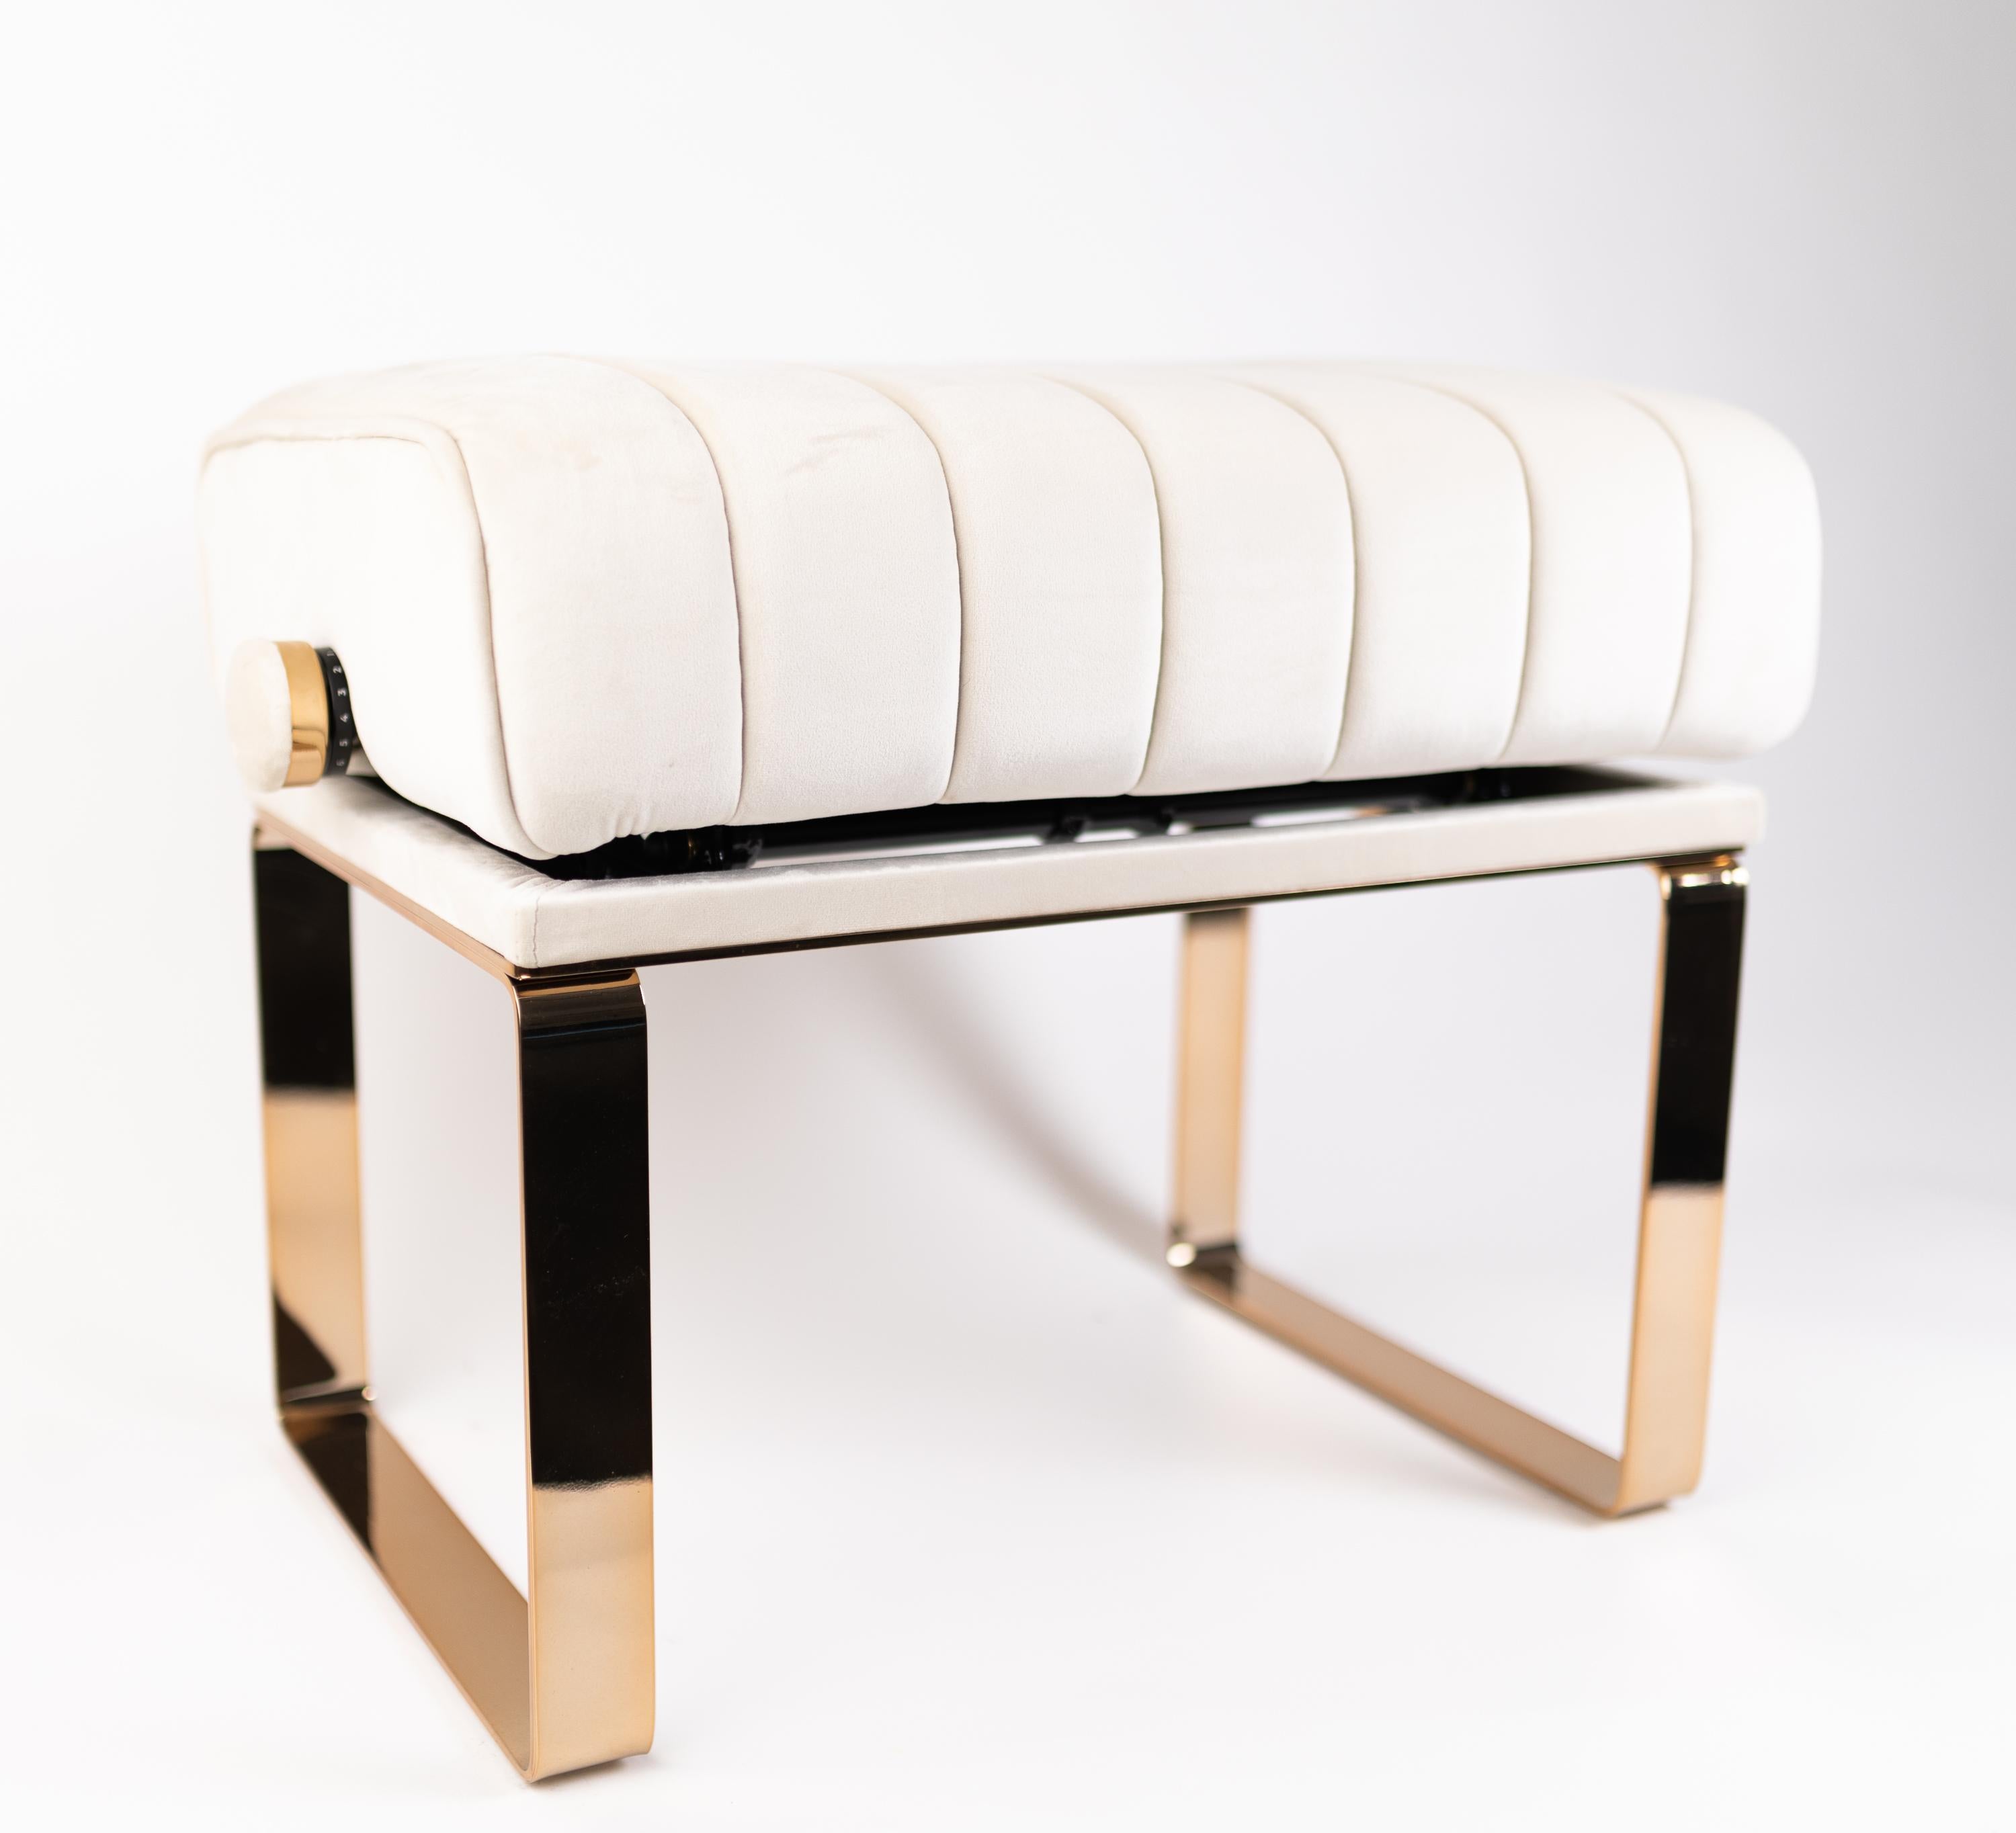 Gabriela is a a versatile piece to accompany your piano and also to use as a vanity stool. Design your own Adjustable Piano bench by choosing between several velvet colors, leather or eco-leather and chrome, black nickel or gold plating for the legs